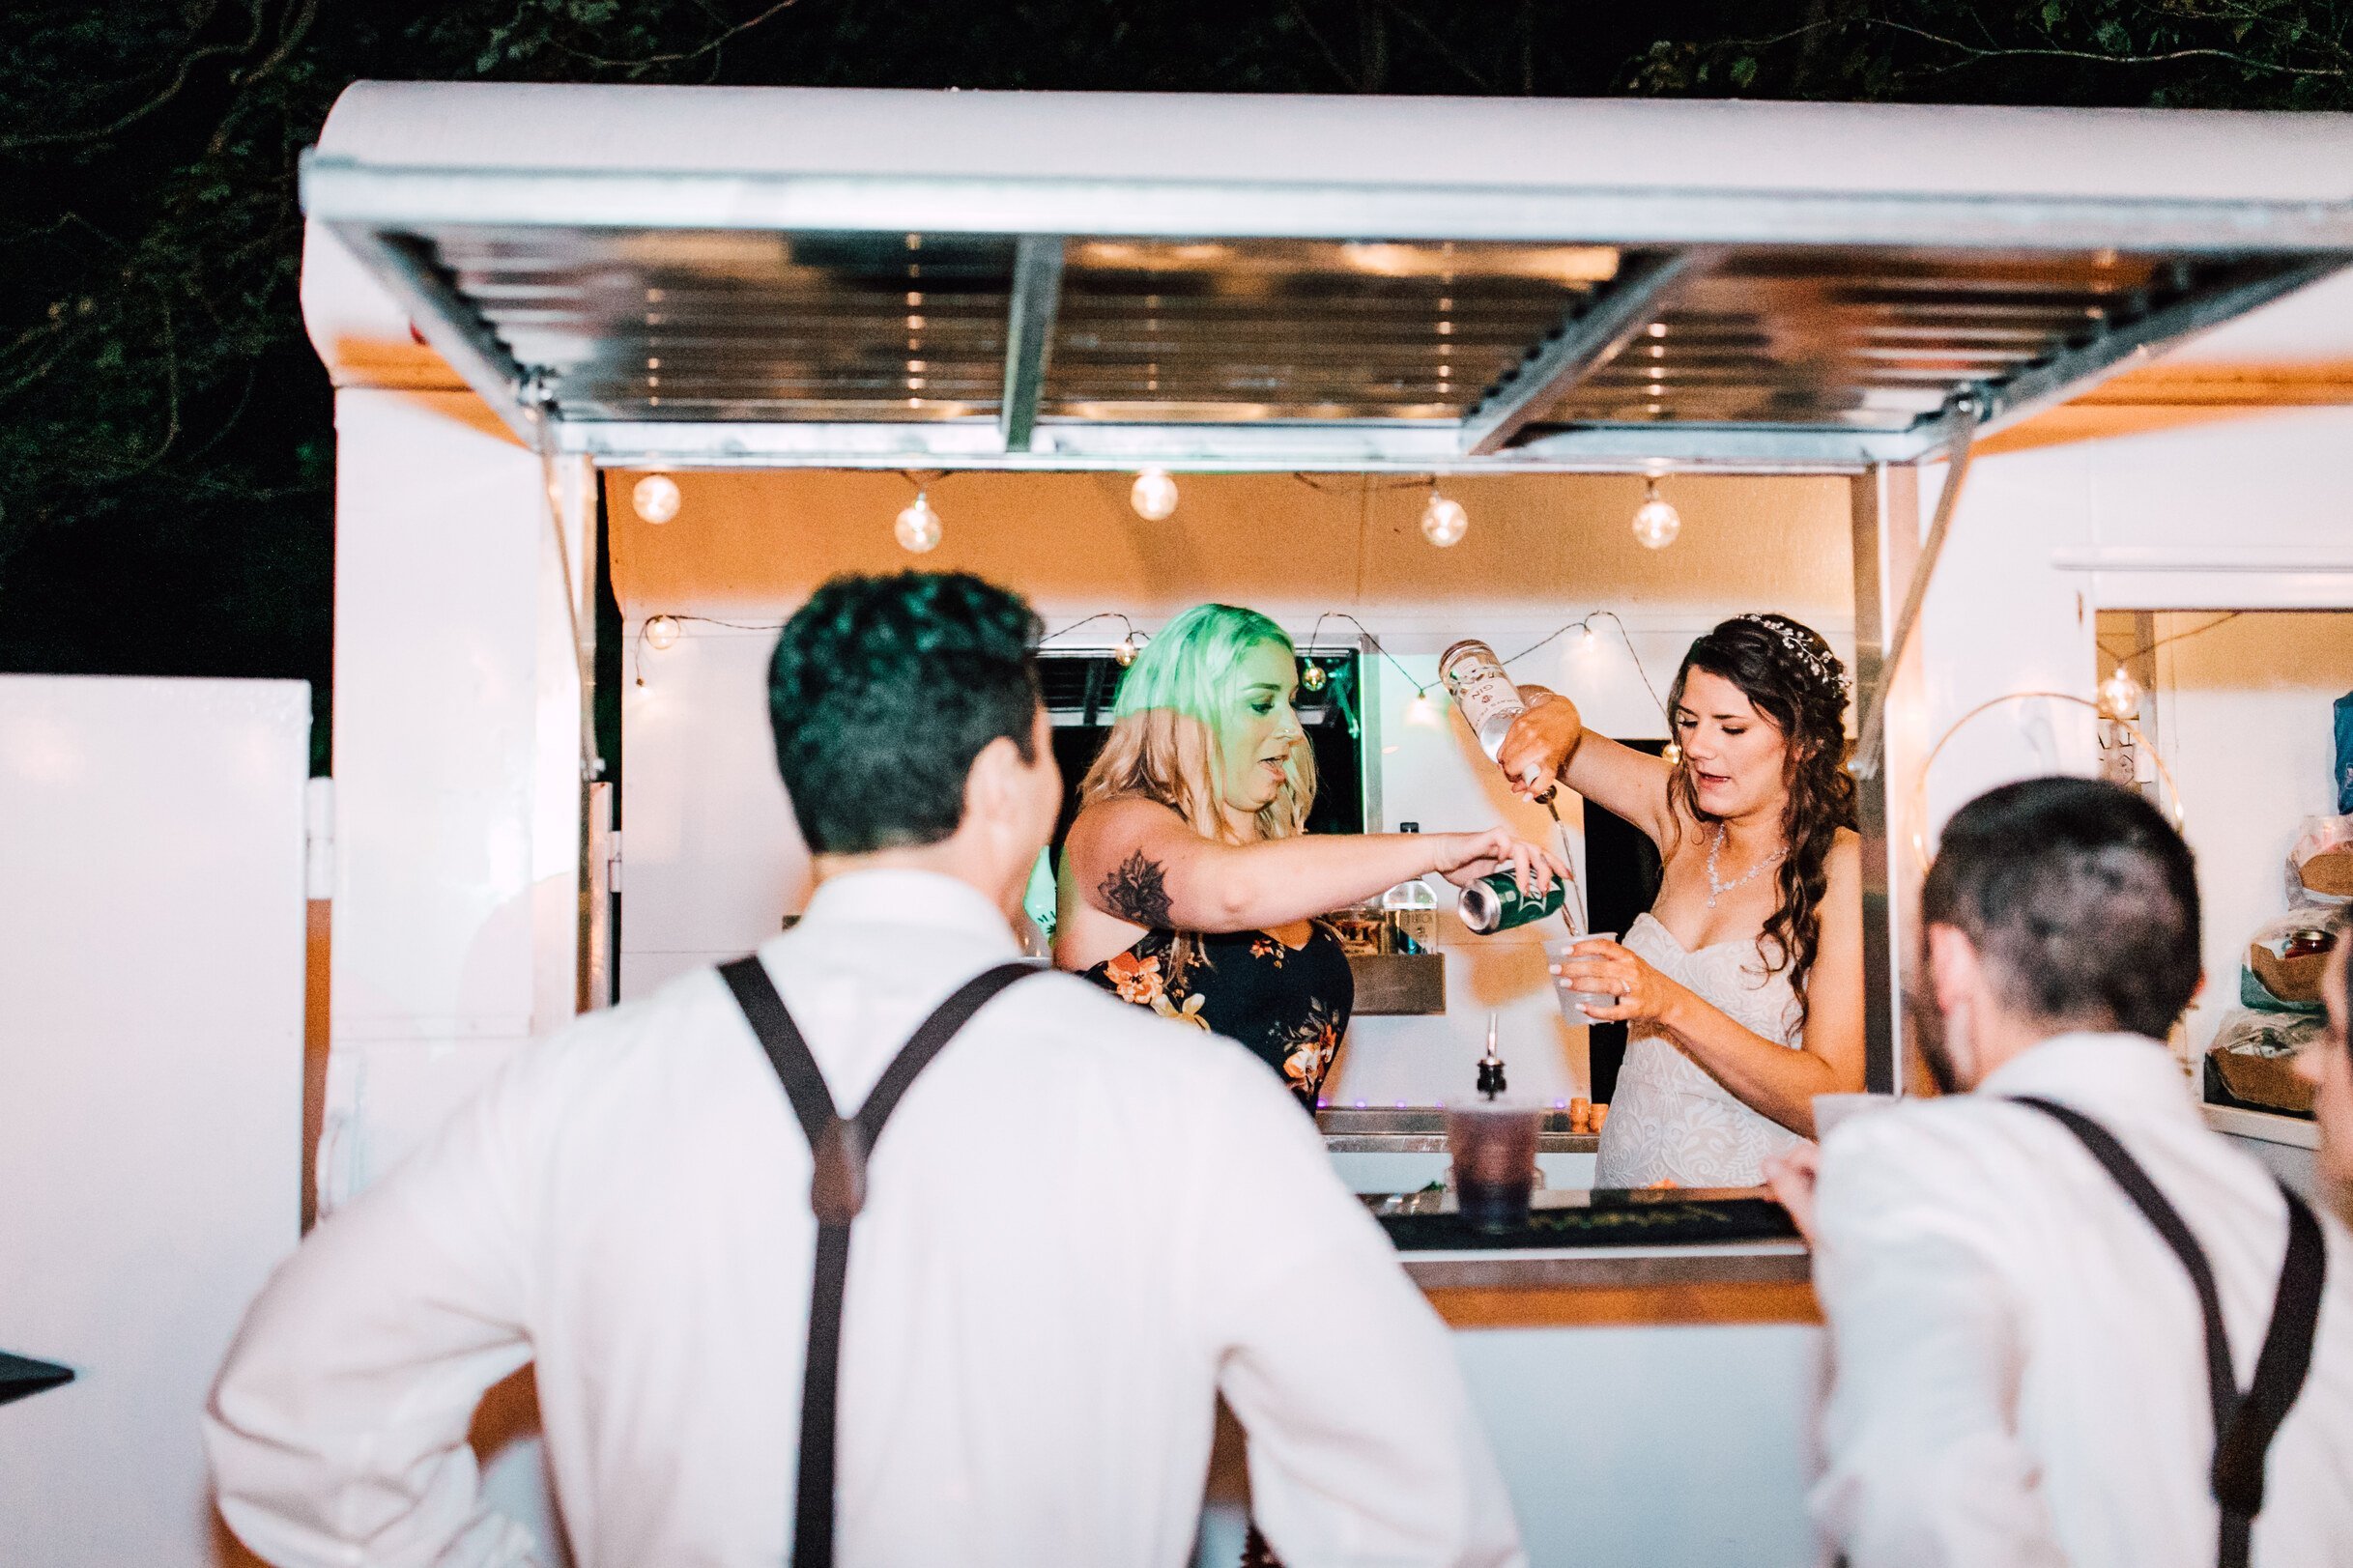  The bride helps serve drinks in a mobile bar at her outdoor fall wedding 